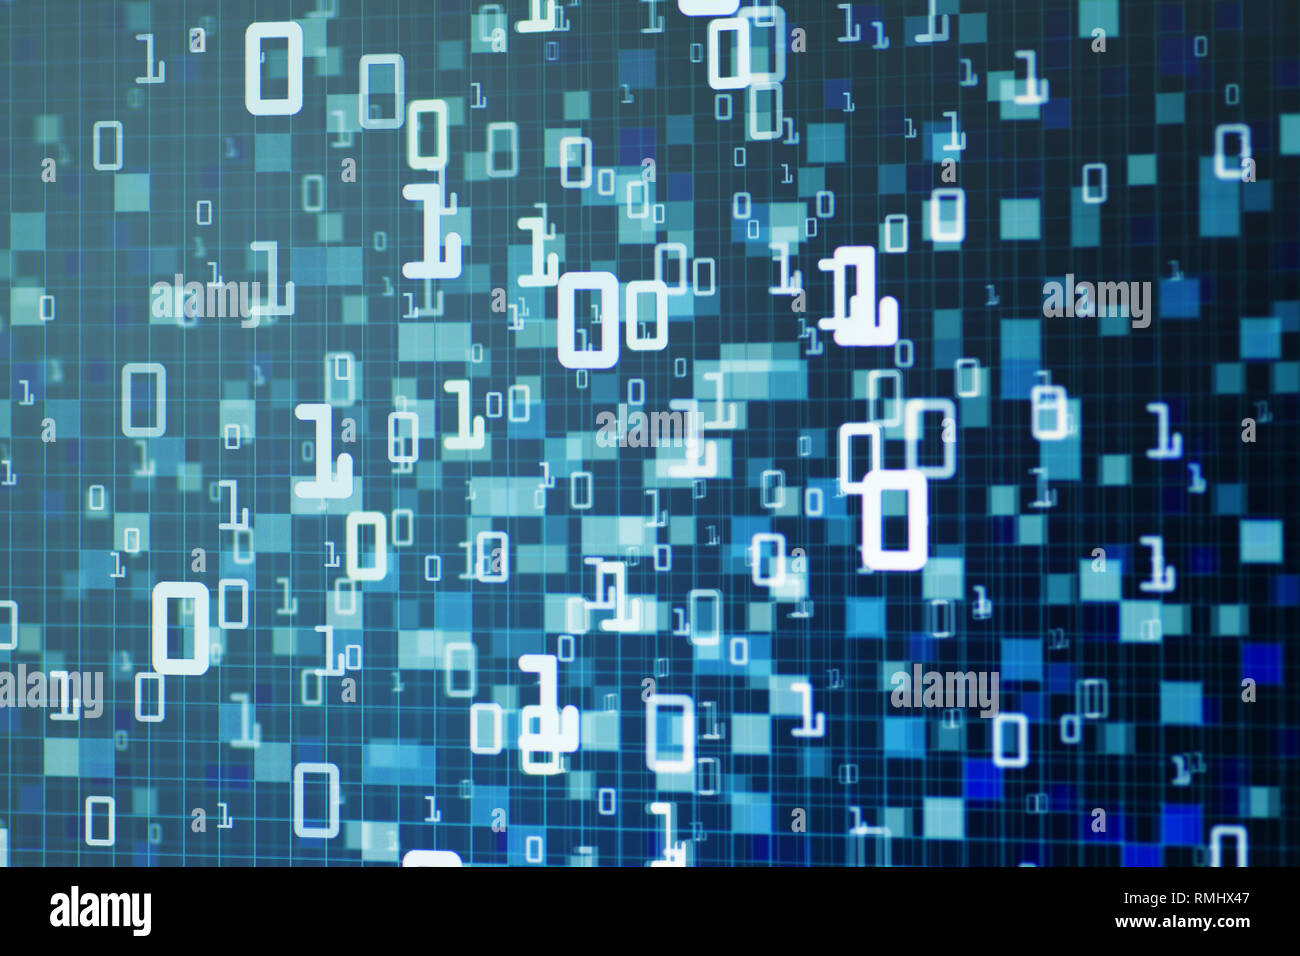 Digital technology binary background. light blue digital data flowing from top to bottom of the frame. blue block pixel abstract background for comput Stock Photo